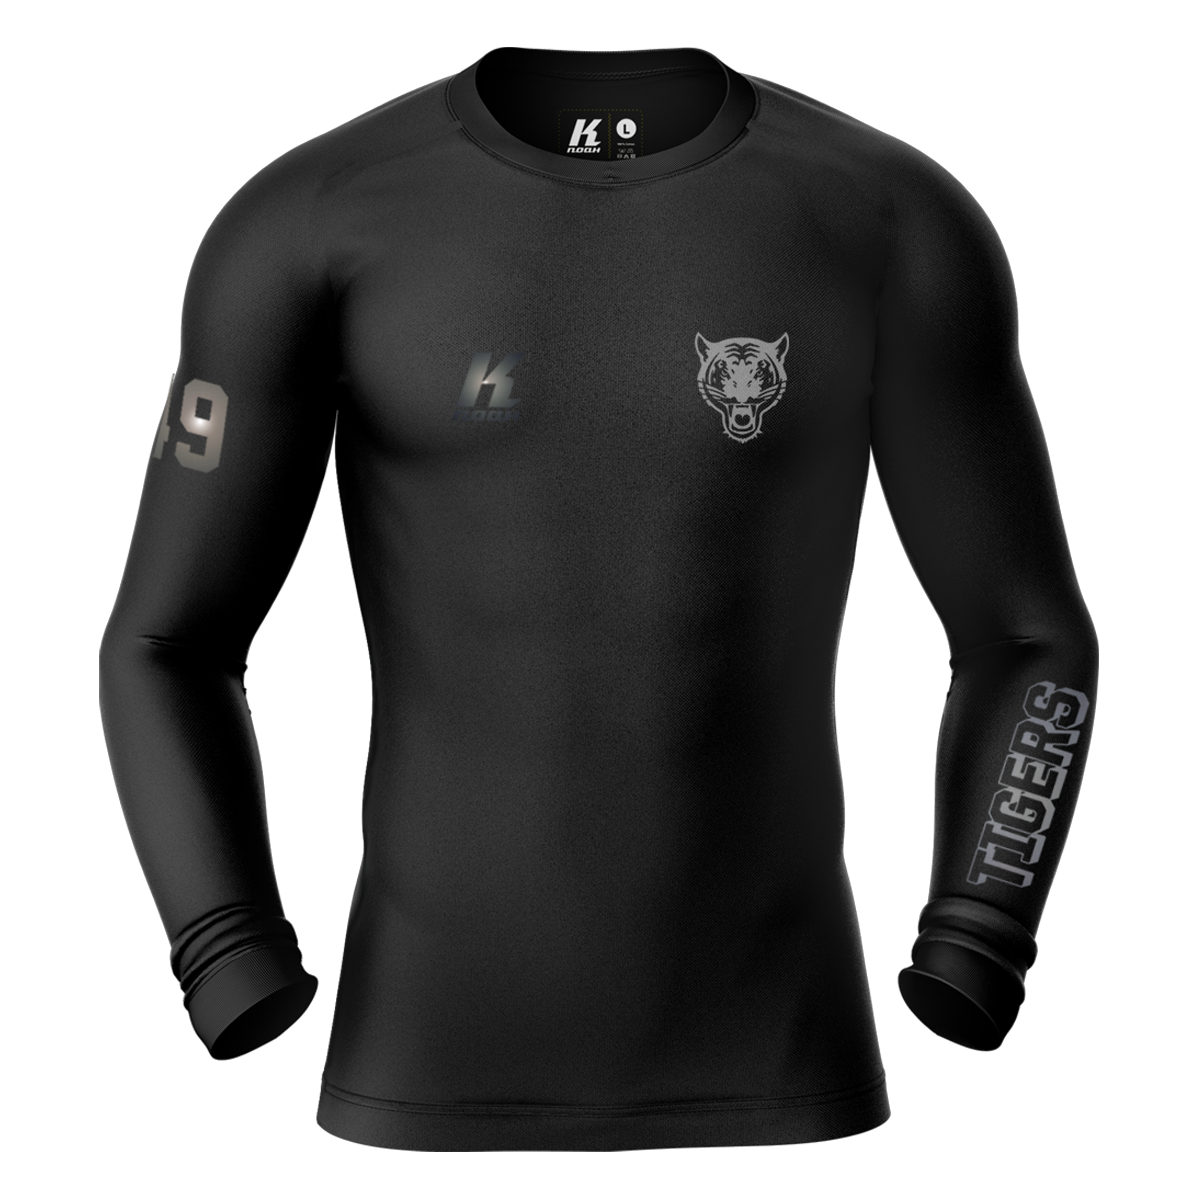 Tigers "Blackline" K.Tech Compression Longsleeve Shirt with Playernumber/Initials